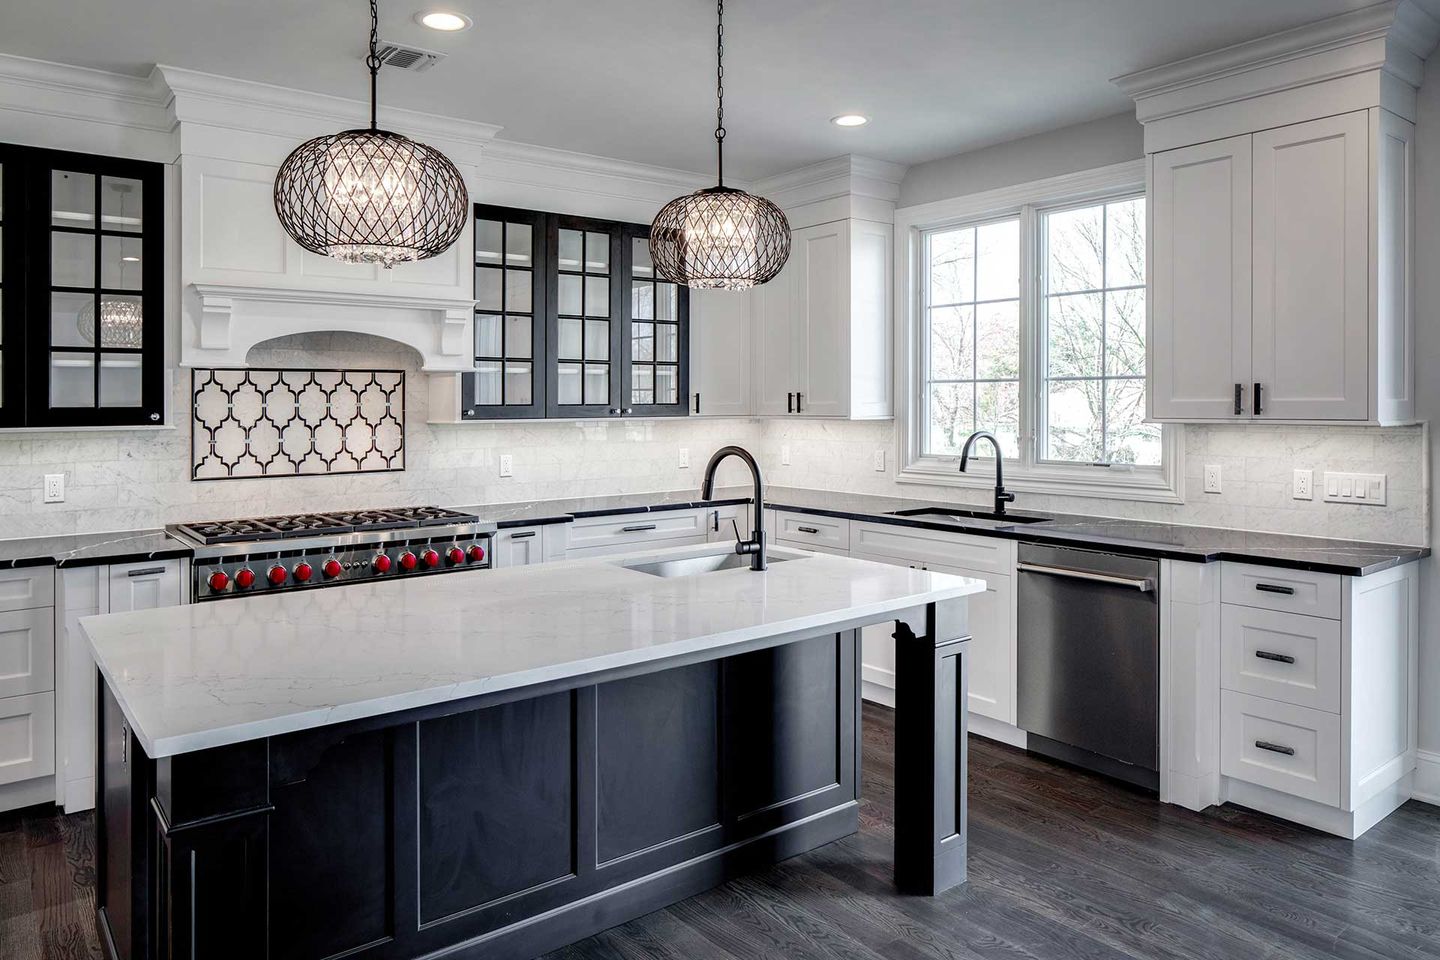 Kitchen with two sinks, pendant lighting